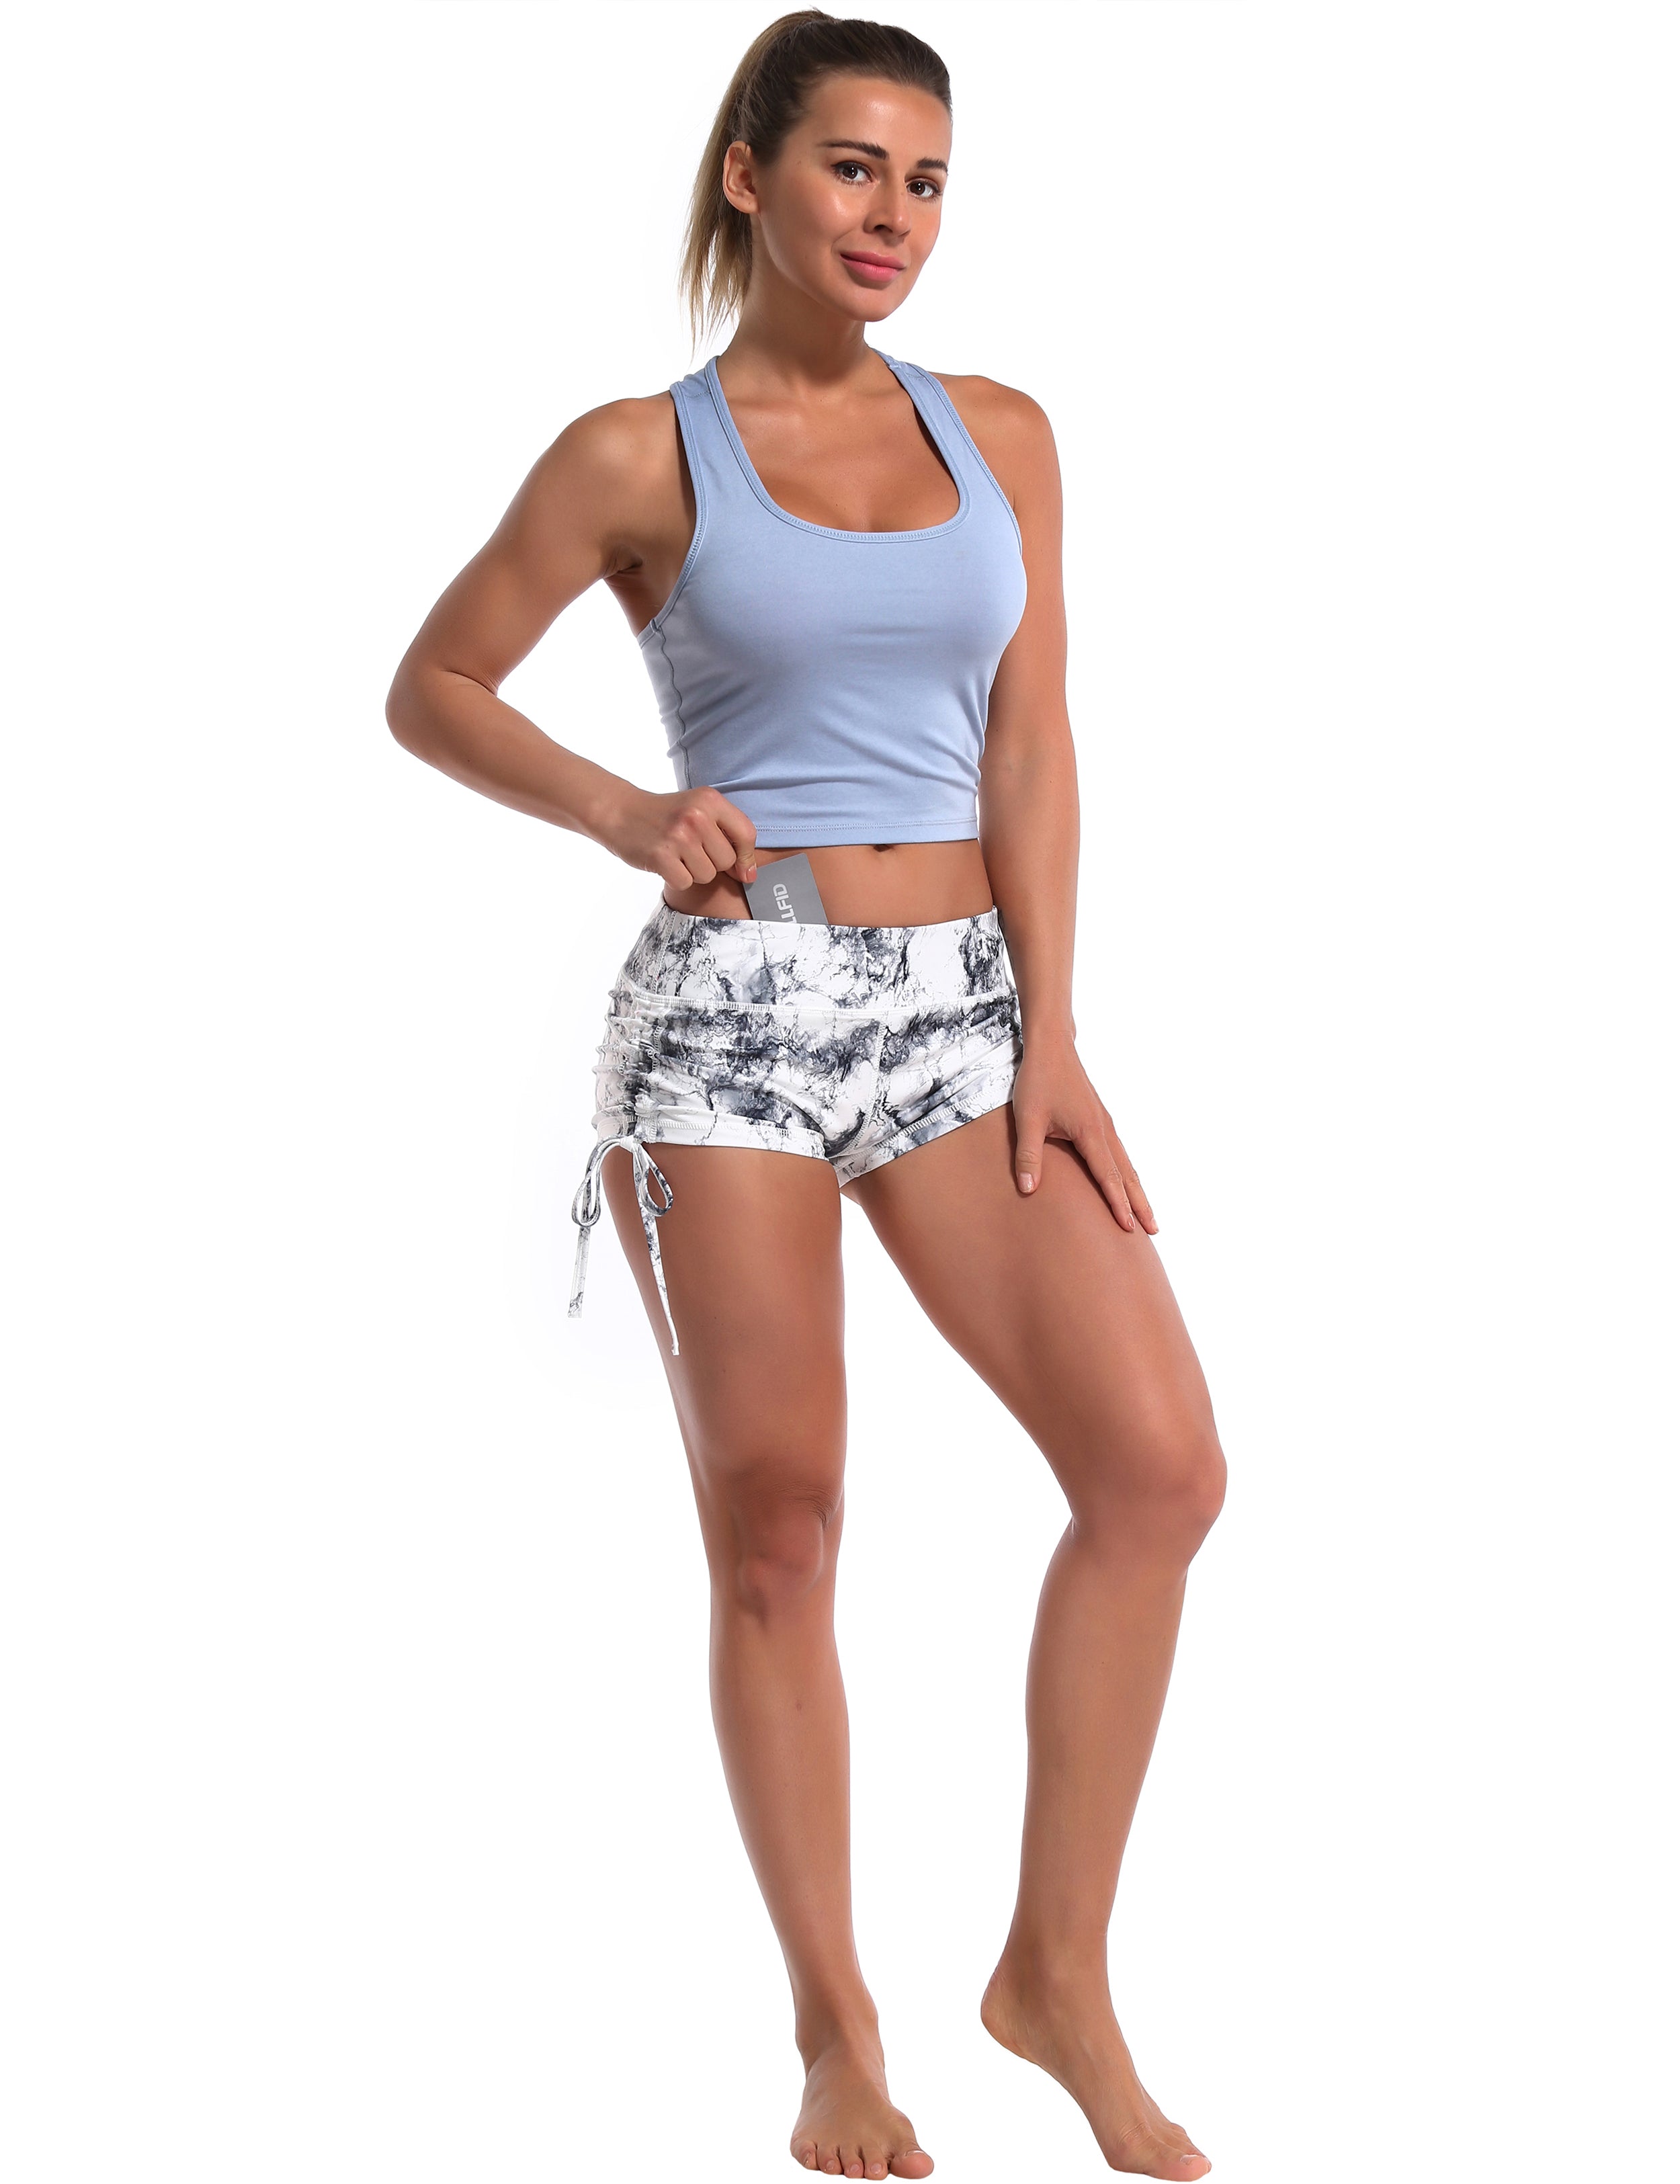 Printed Side Drawstring Hot Shorts arabescato Sleek, soft, smooth and totally comfortable: our newest sexy style is here. Softest-ever fabric High elasticity High density 4-way stretch Fabric doesn't attract lint easily No see-through Moisture-wicking Machine wash 78% Polyester, 22% Spandex